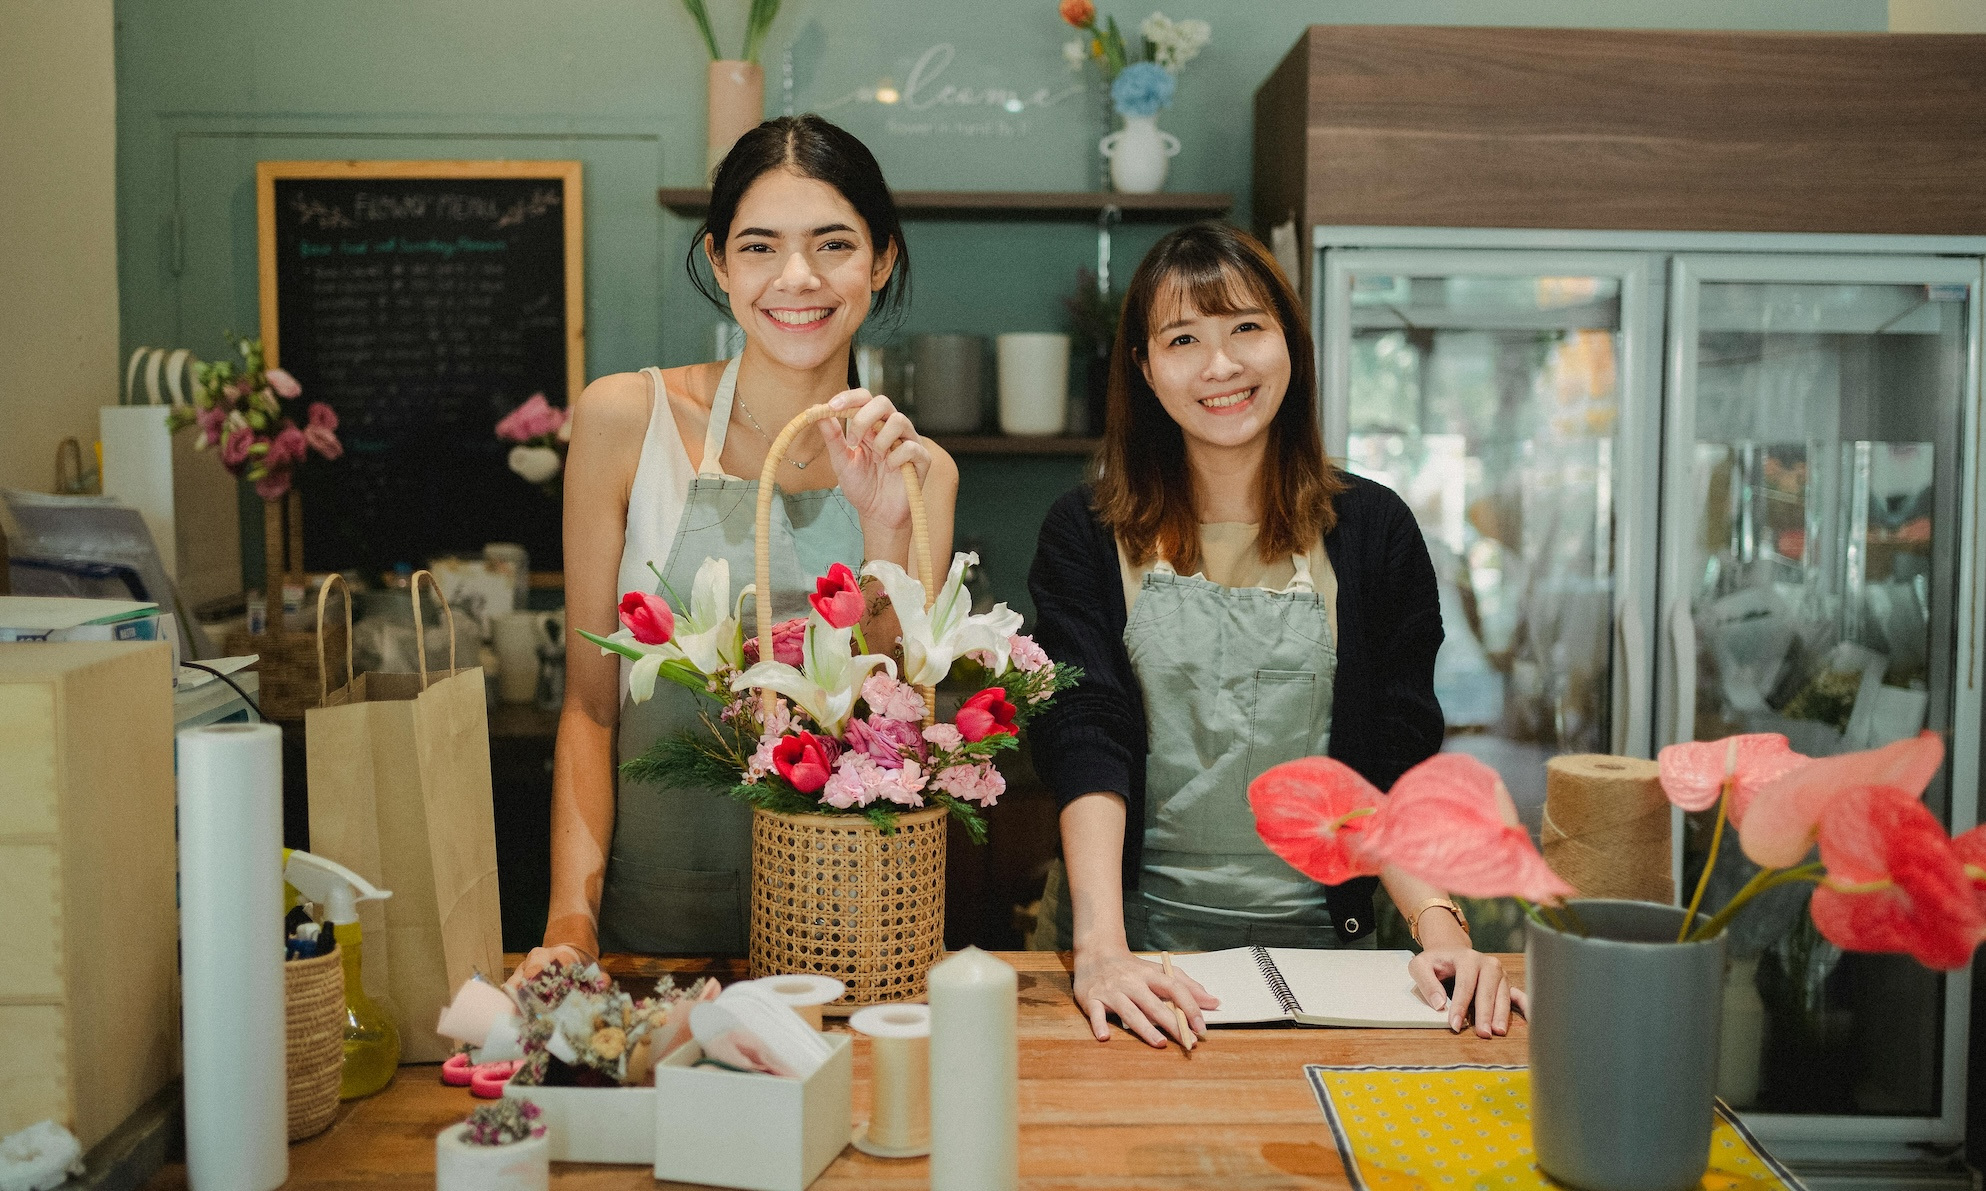 Two floral shop employees smile as one holds a floral arrangement and the other works on bookeeping.